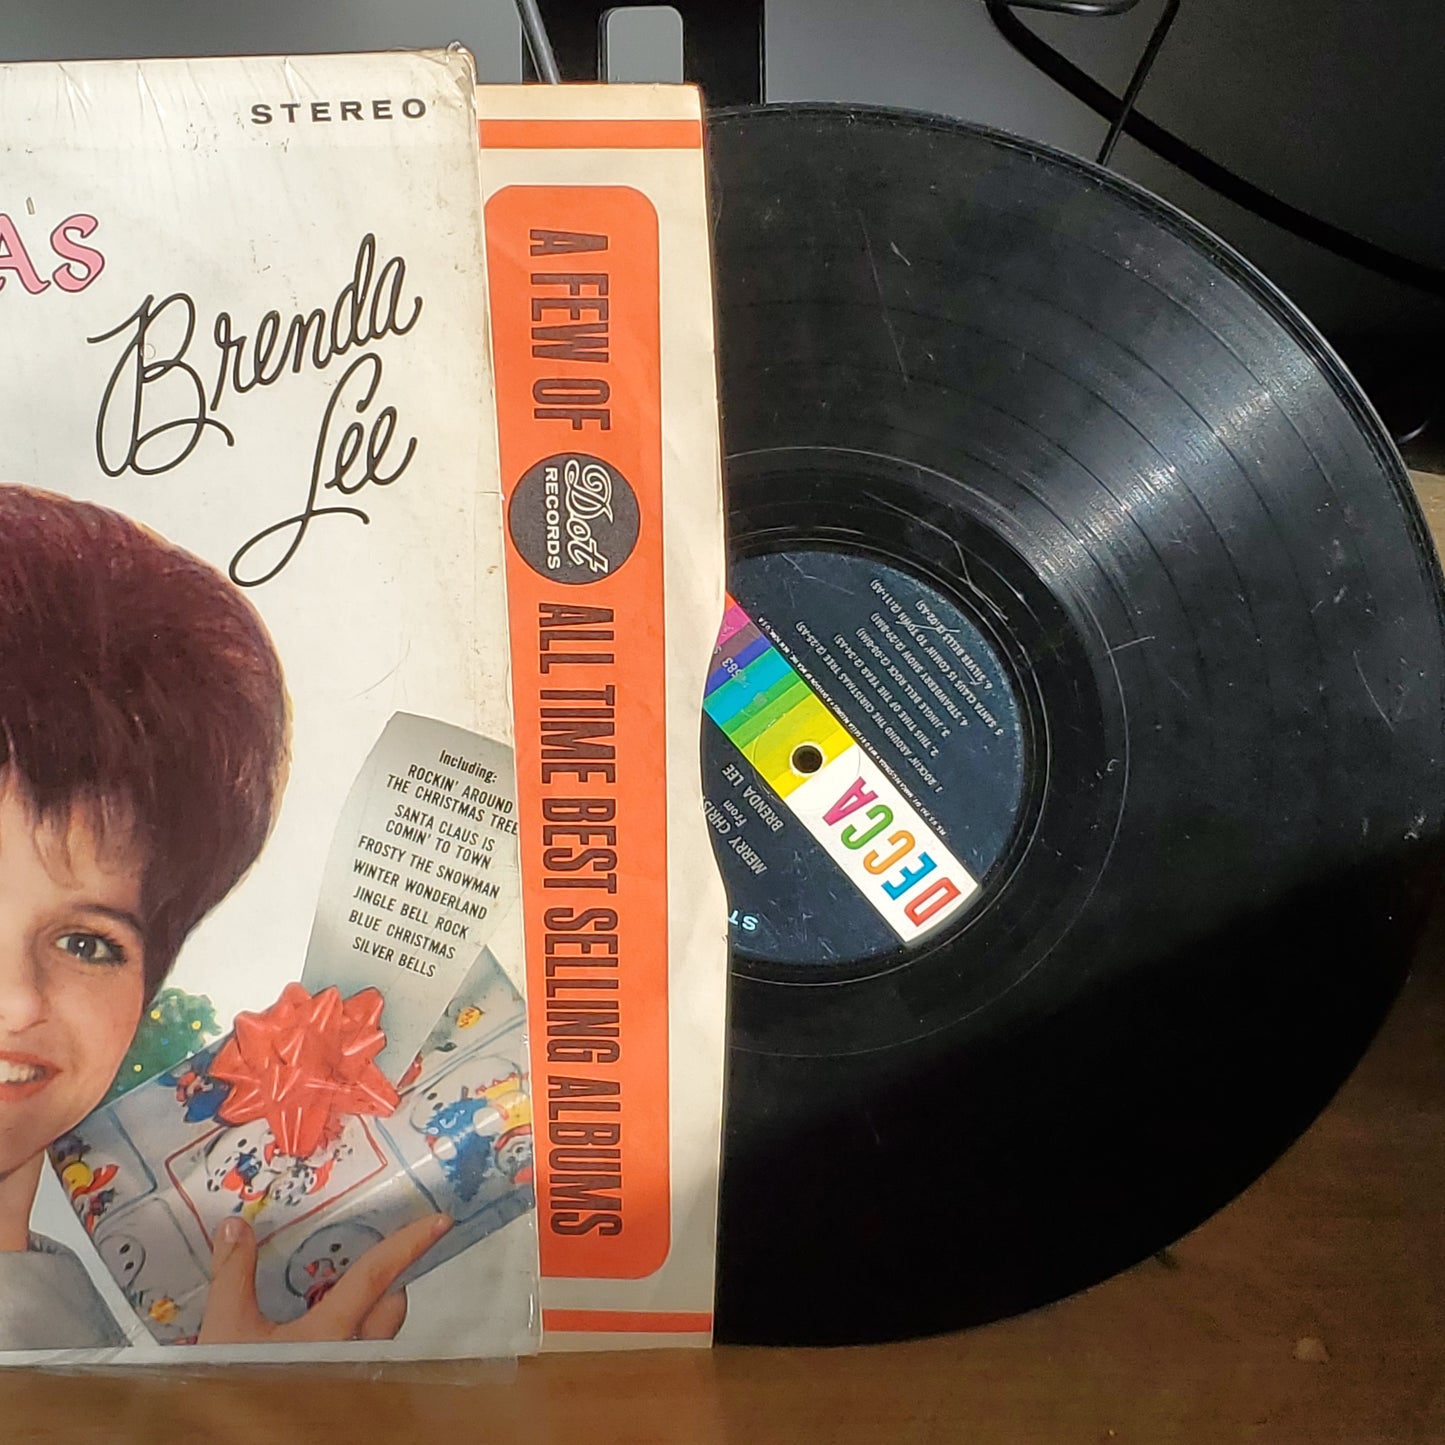 Brenda Lee Merry Christmas By Decca Records